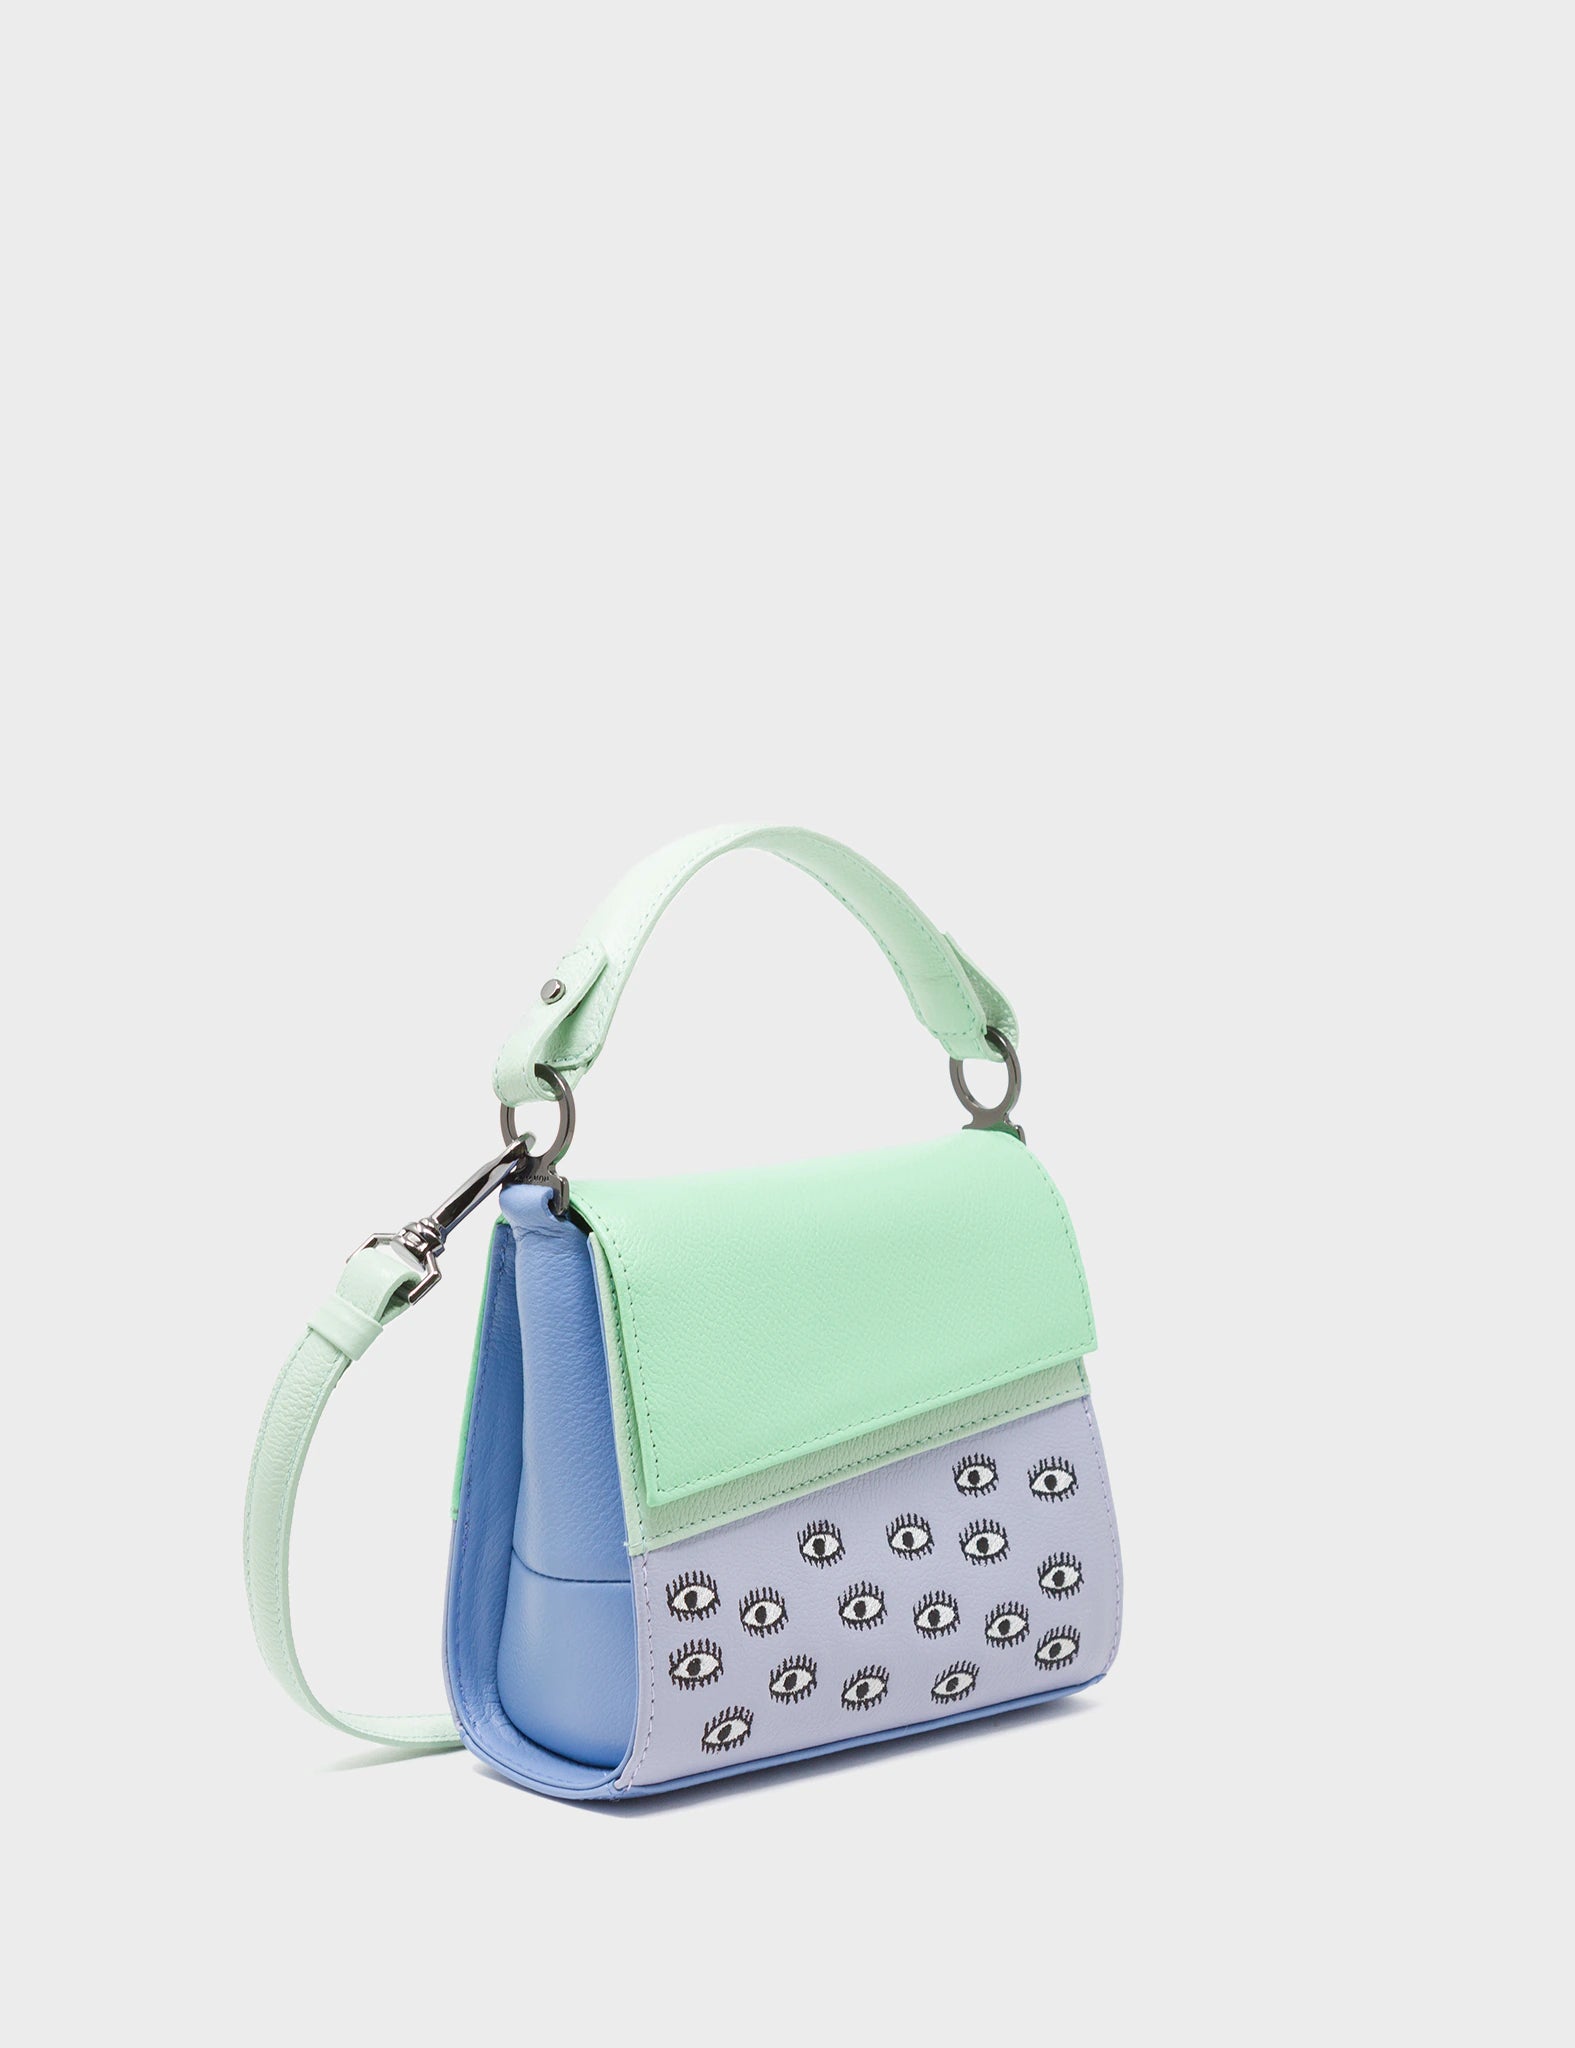 Anastasio Mini Crossbody Handbag Blue and Green Leather - All Over Eyes Embroidery - Main view